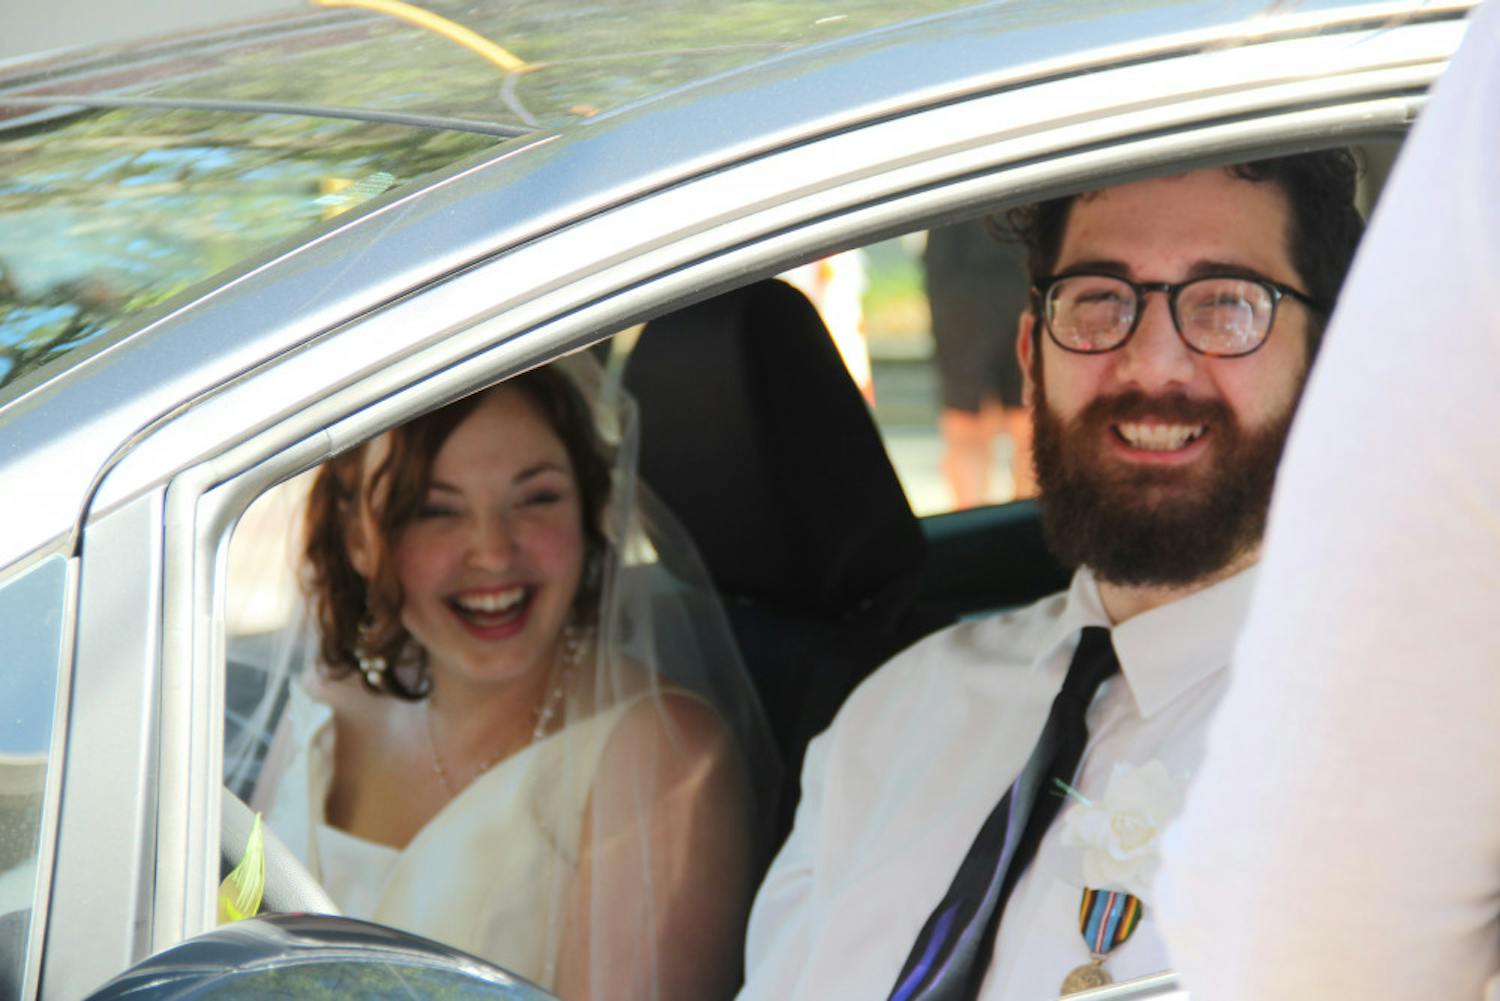 Decked in veils, flowers and formal wear, couples from across Florida drove cars, trucks and limousines to the drive-thru-turned-“Wedding Window.” They pronounced their love to each other at the Alachua County Family and Civil Courthouse from about 5 to 11 p.m. Thursday. 
Read more here.